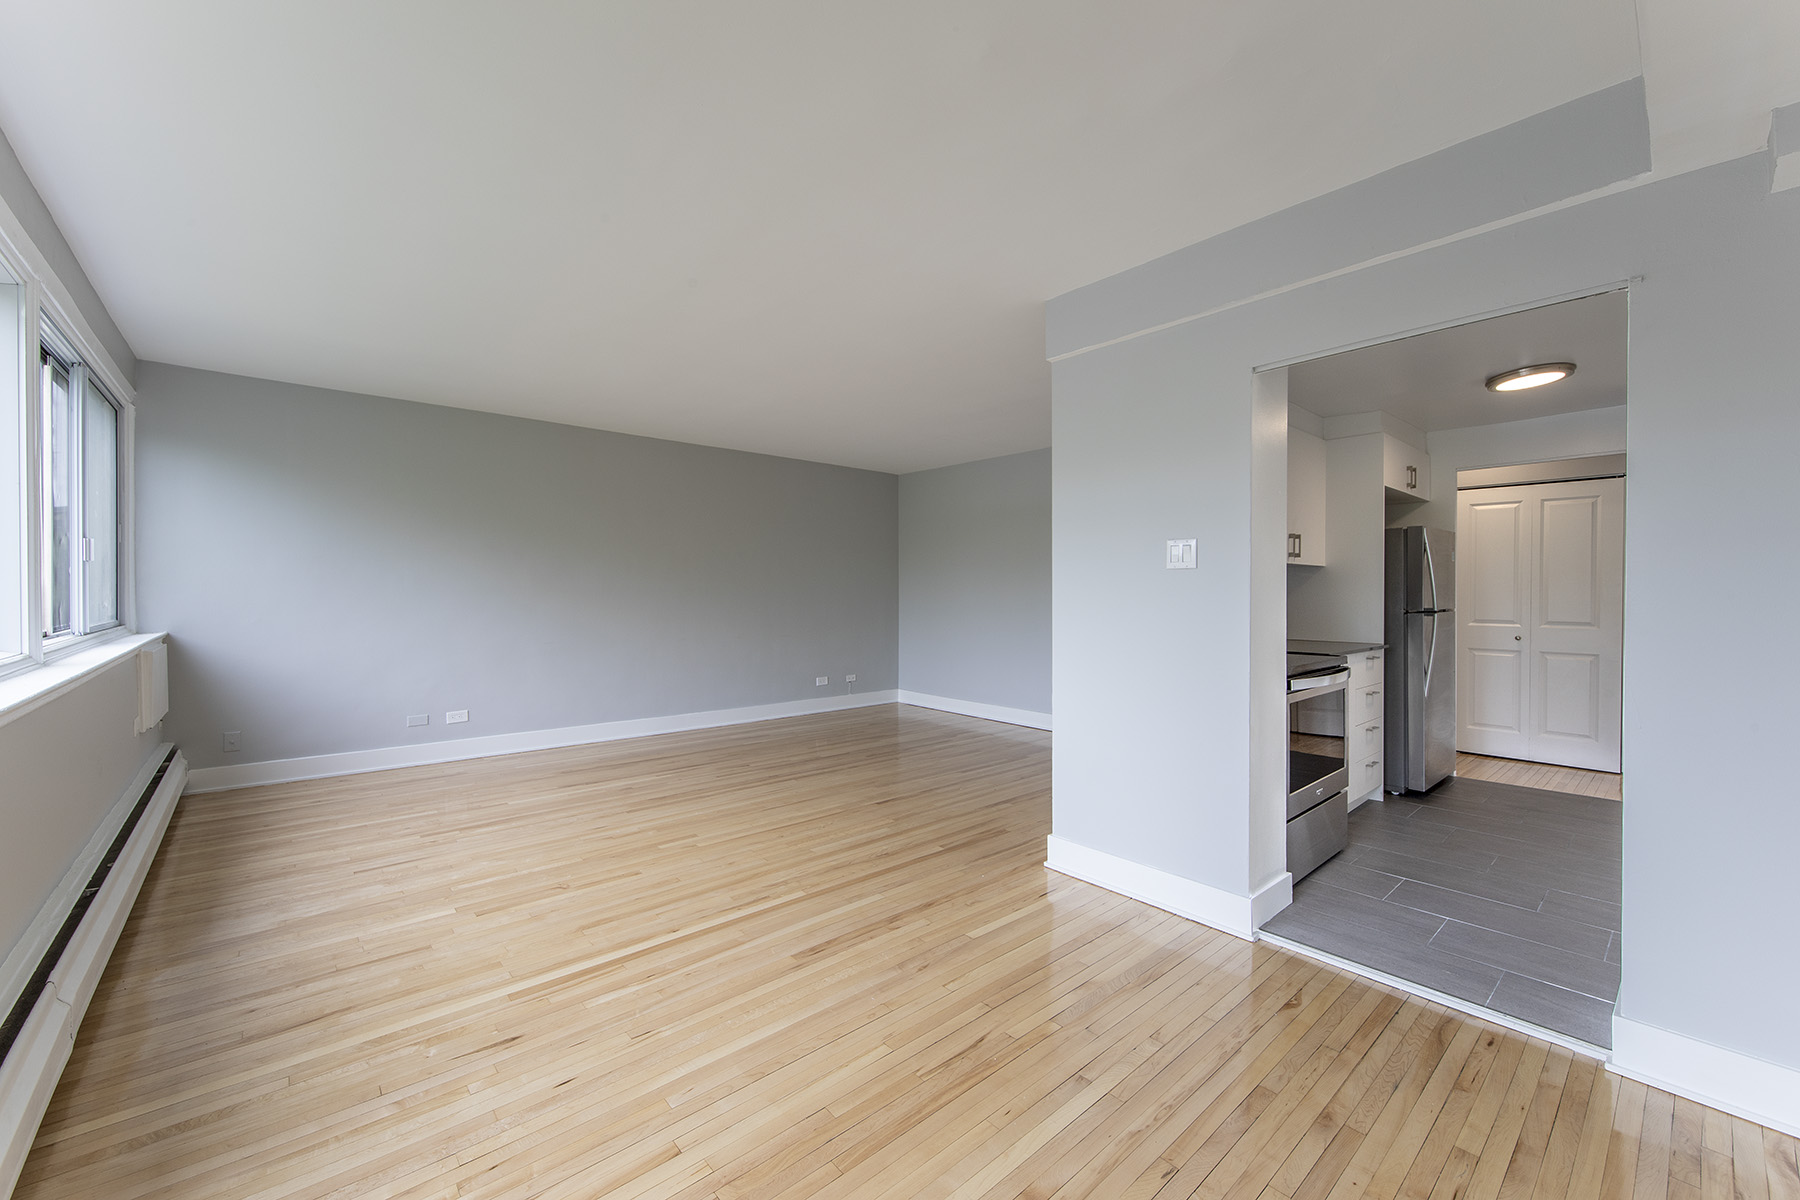 1 bedroom Apartments for rent in Cote-St-Luc at 5765 Cote St-Luc - Photo 02 - RentersPages – L401532